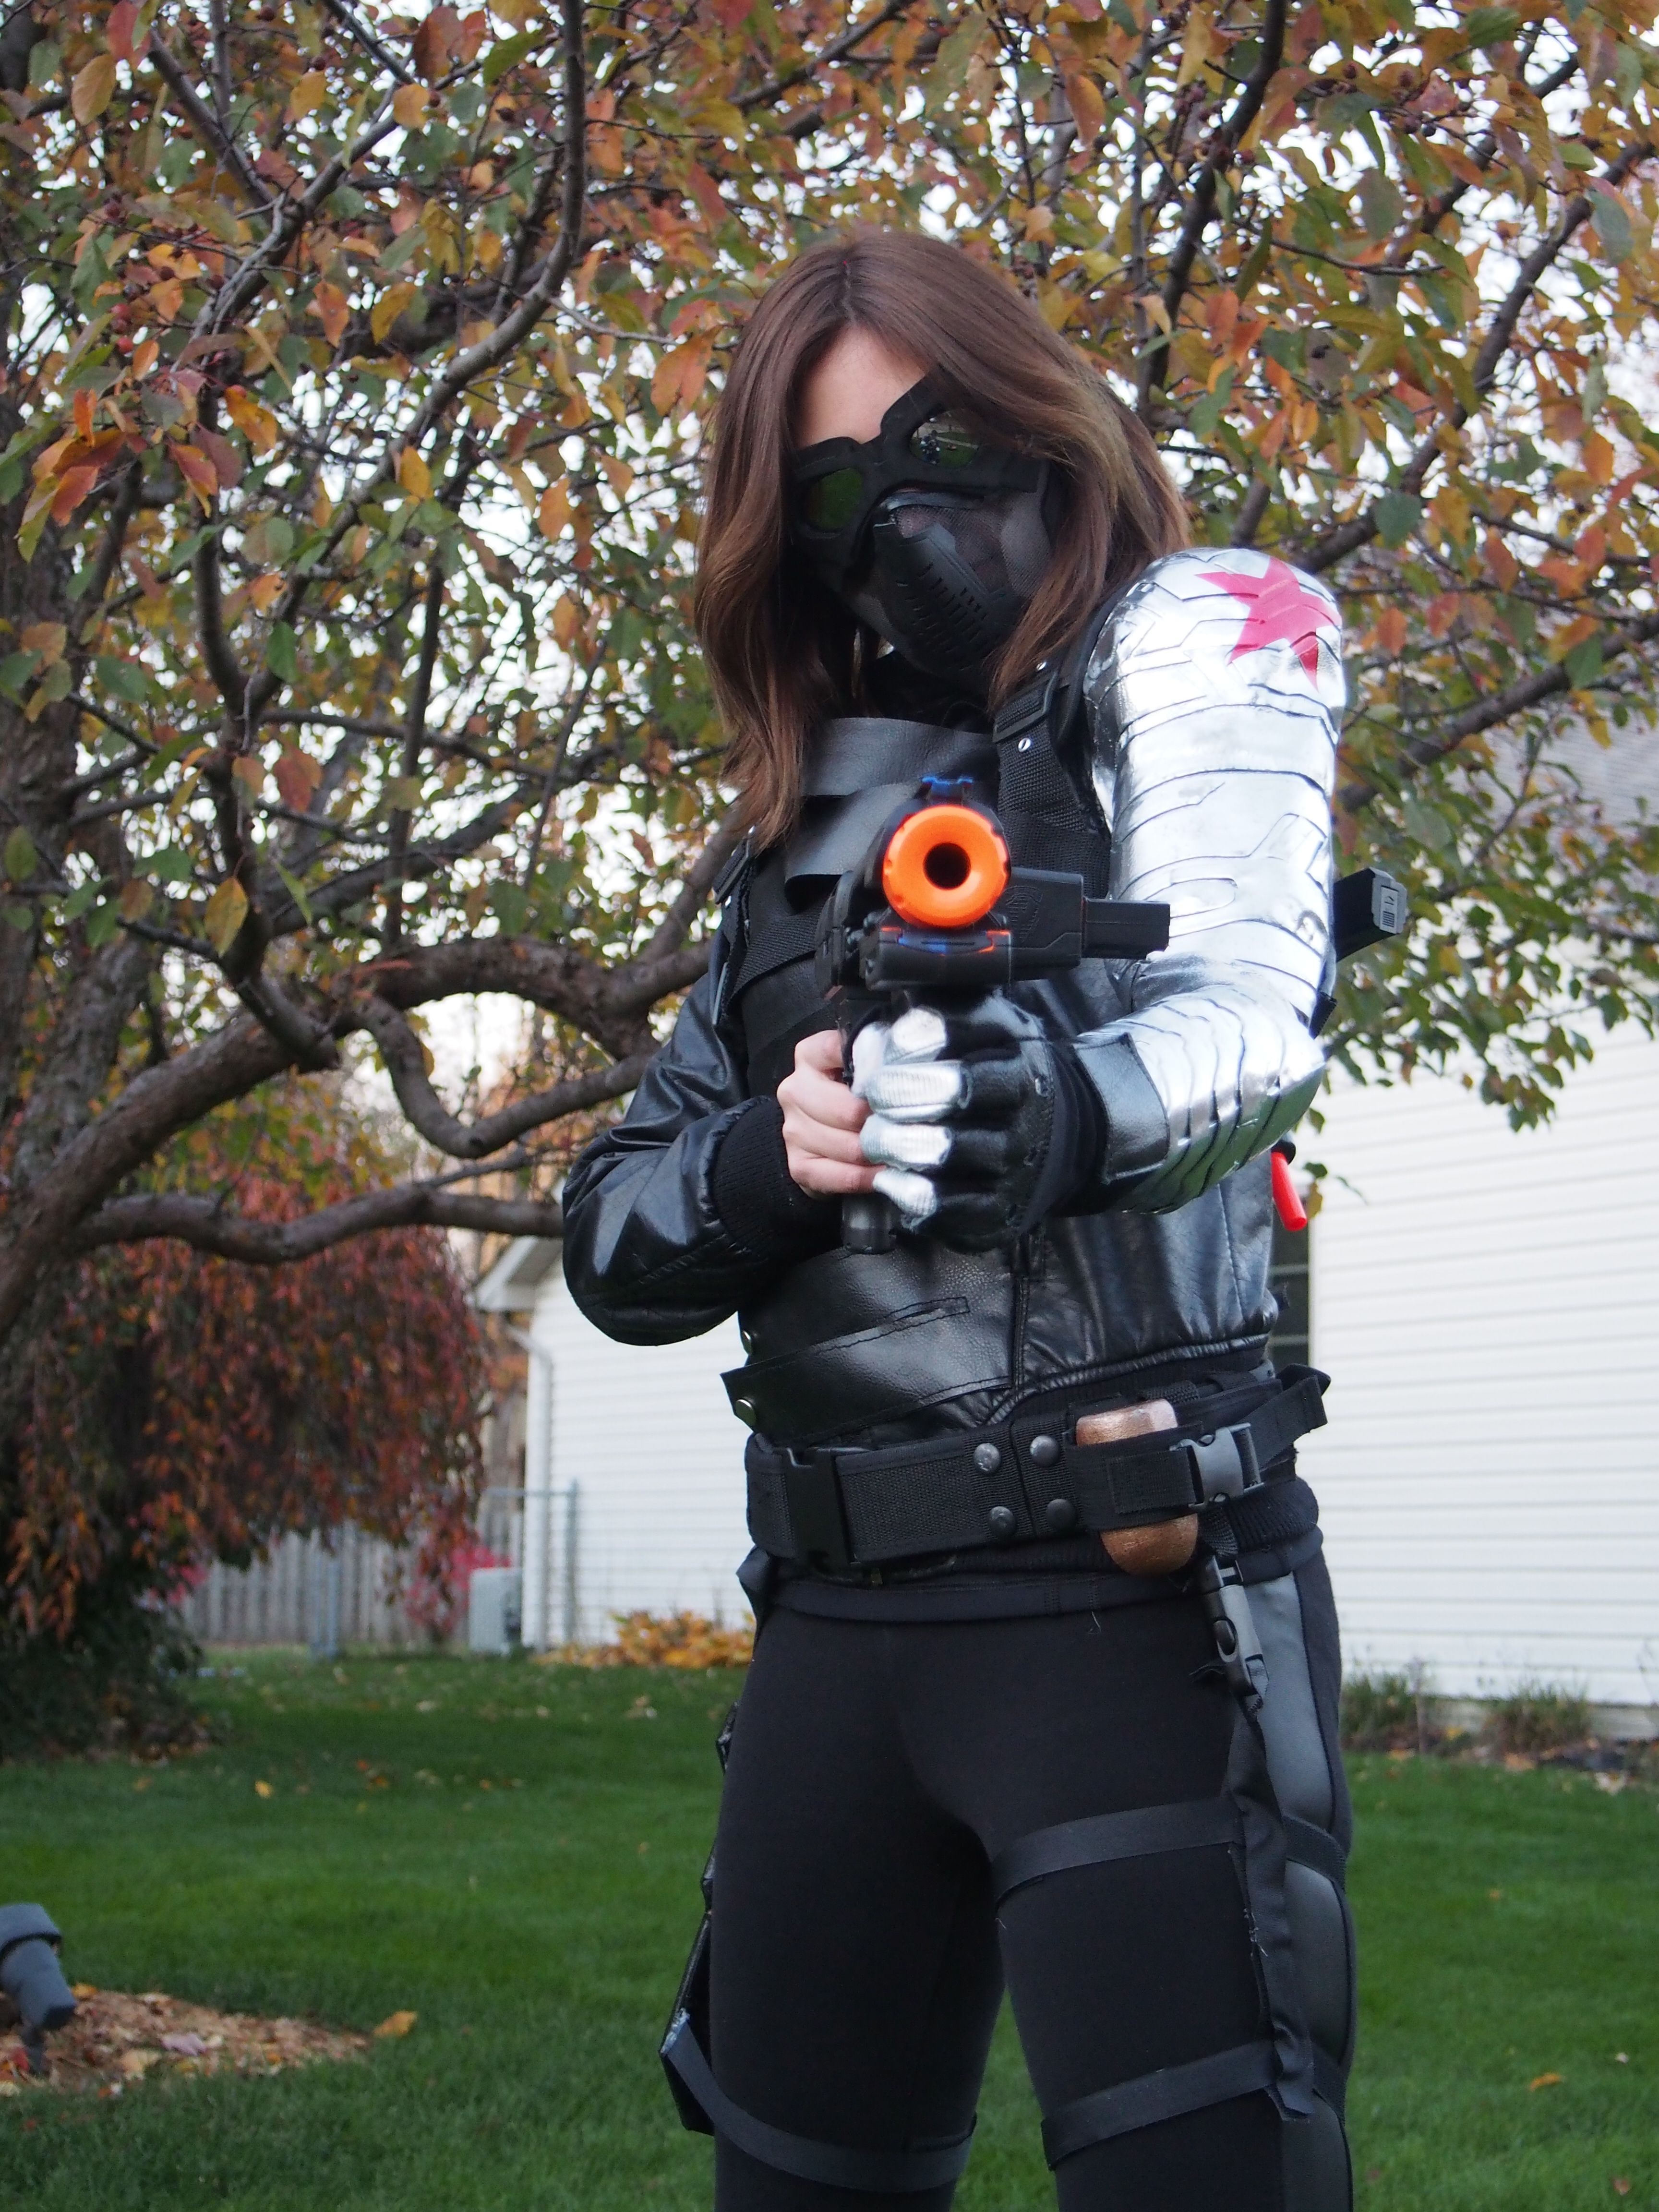 Brownie616 The Winter Soldier Costume for 2014 Halloween Contest | RPF  Costume and Prop Maker Community